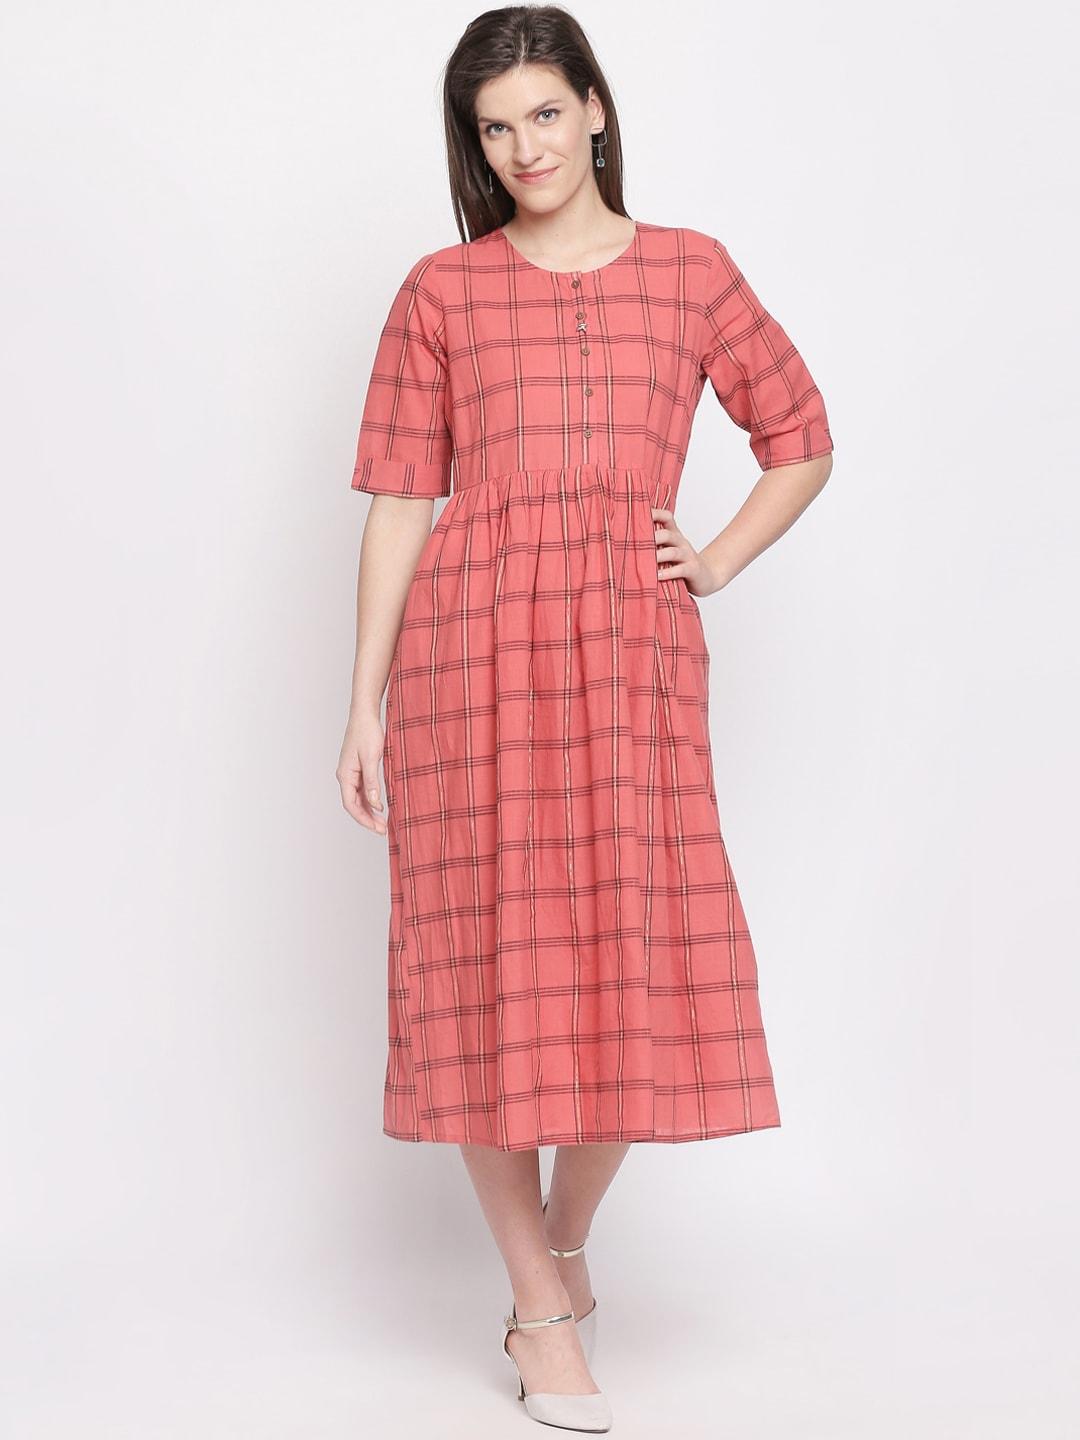 akkriti by pantaloons women coral pink & black checked fit and flare dress